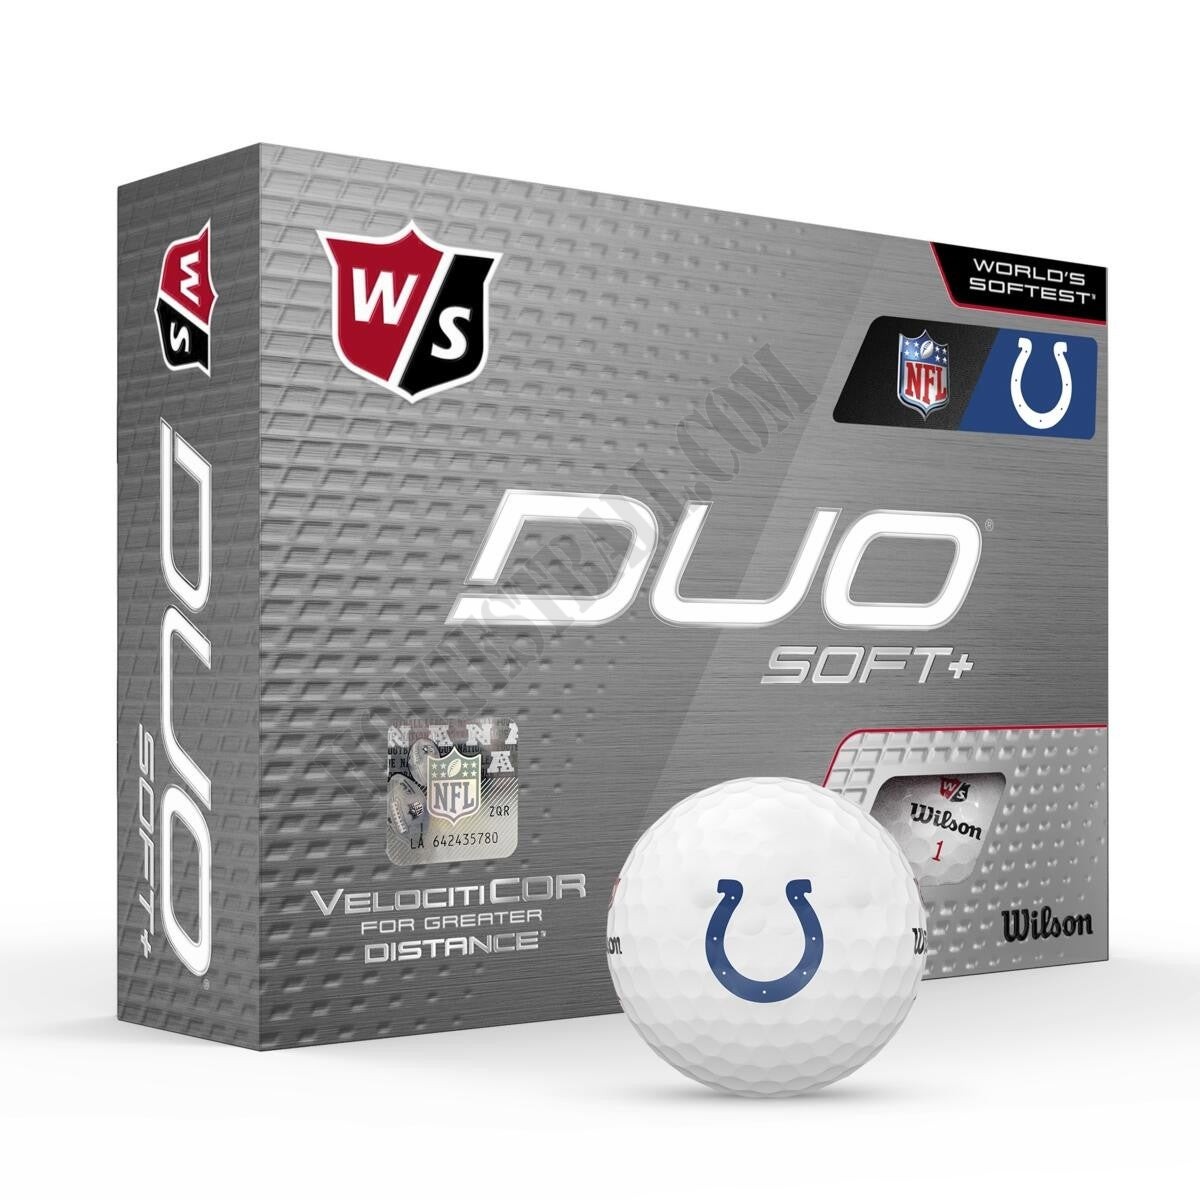 Duo Soft+ NFL Golf Balls - Indianapolis Colts ● Wilson Promotions - -0